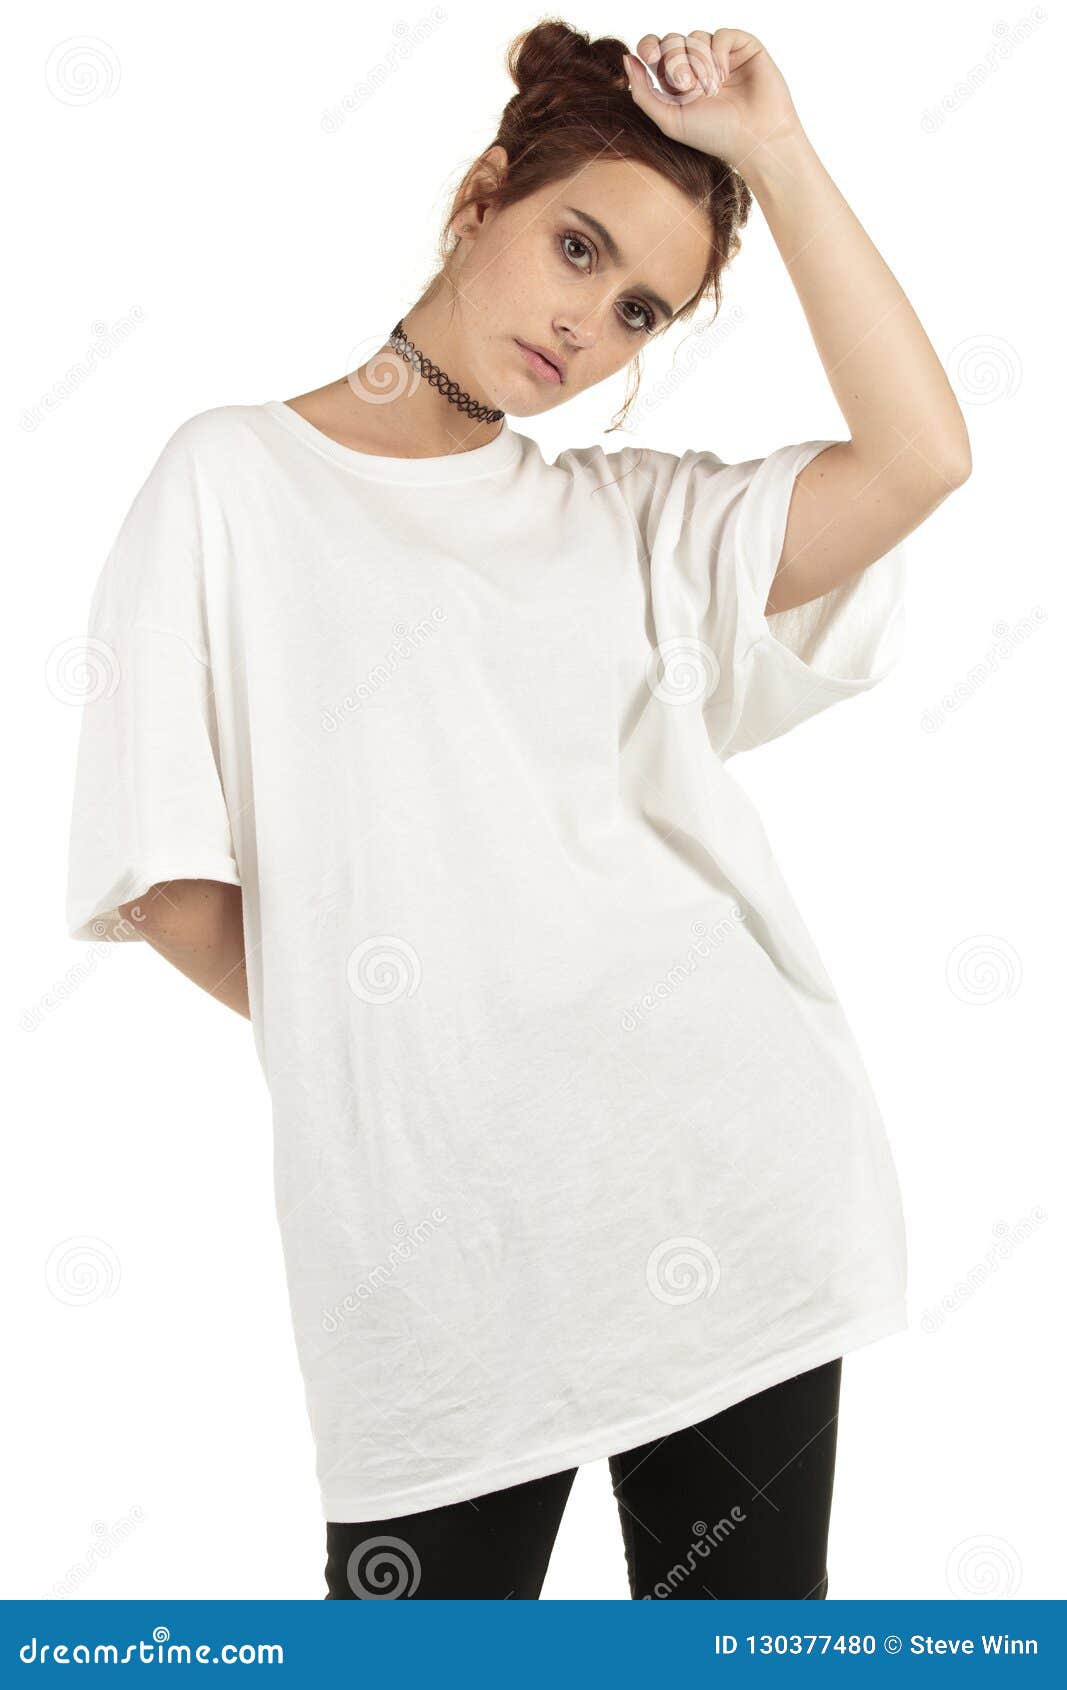 Download Urban Street Wear Fashion Model Ready For Your Oversized T Shirt Designs Stock Photo Image Of Buns Blank 130377480